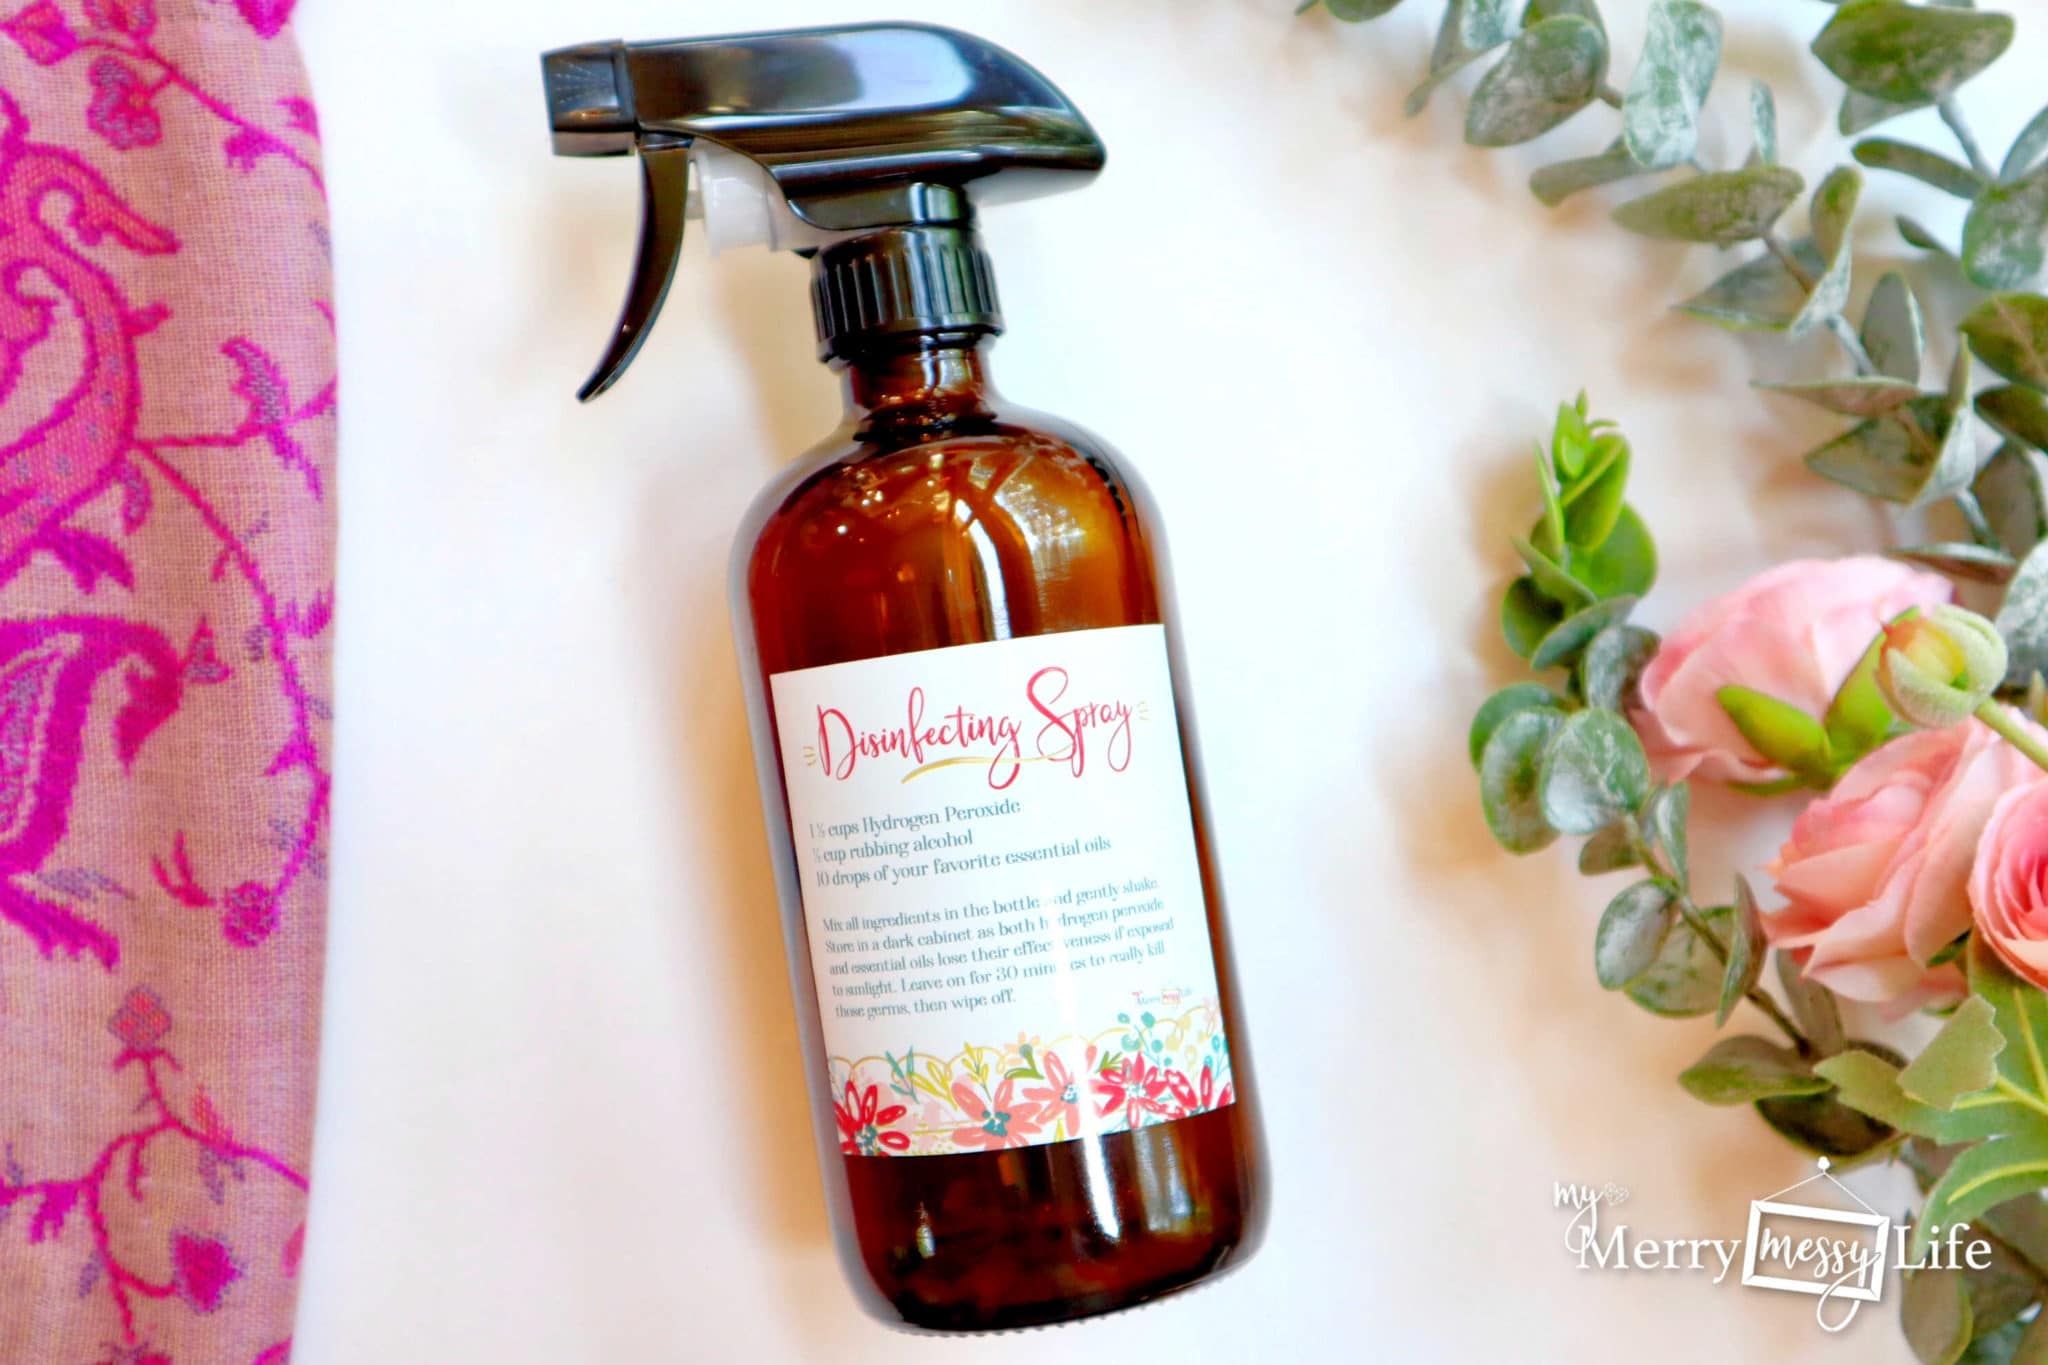 DIY Natural Disinfecting Spray Recipe using Hydrogen Peroxiding and 